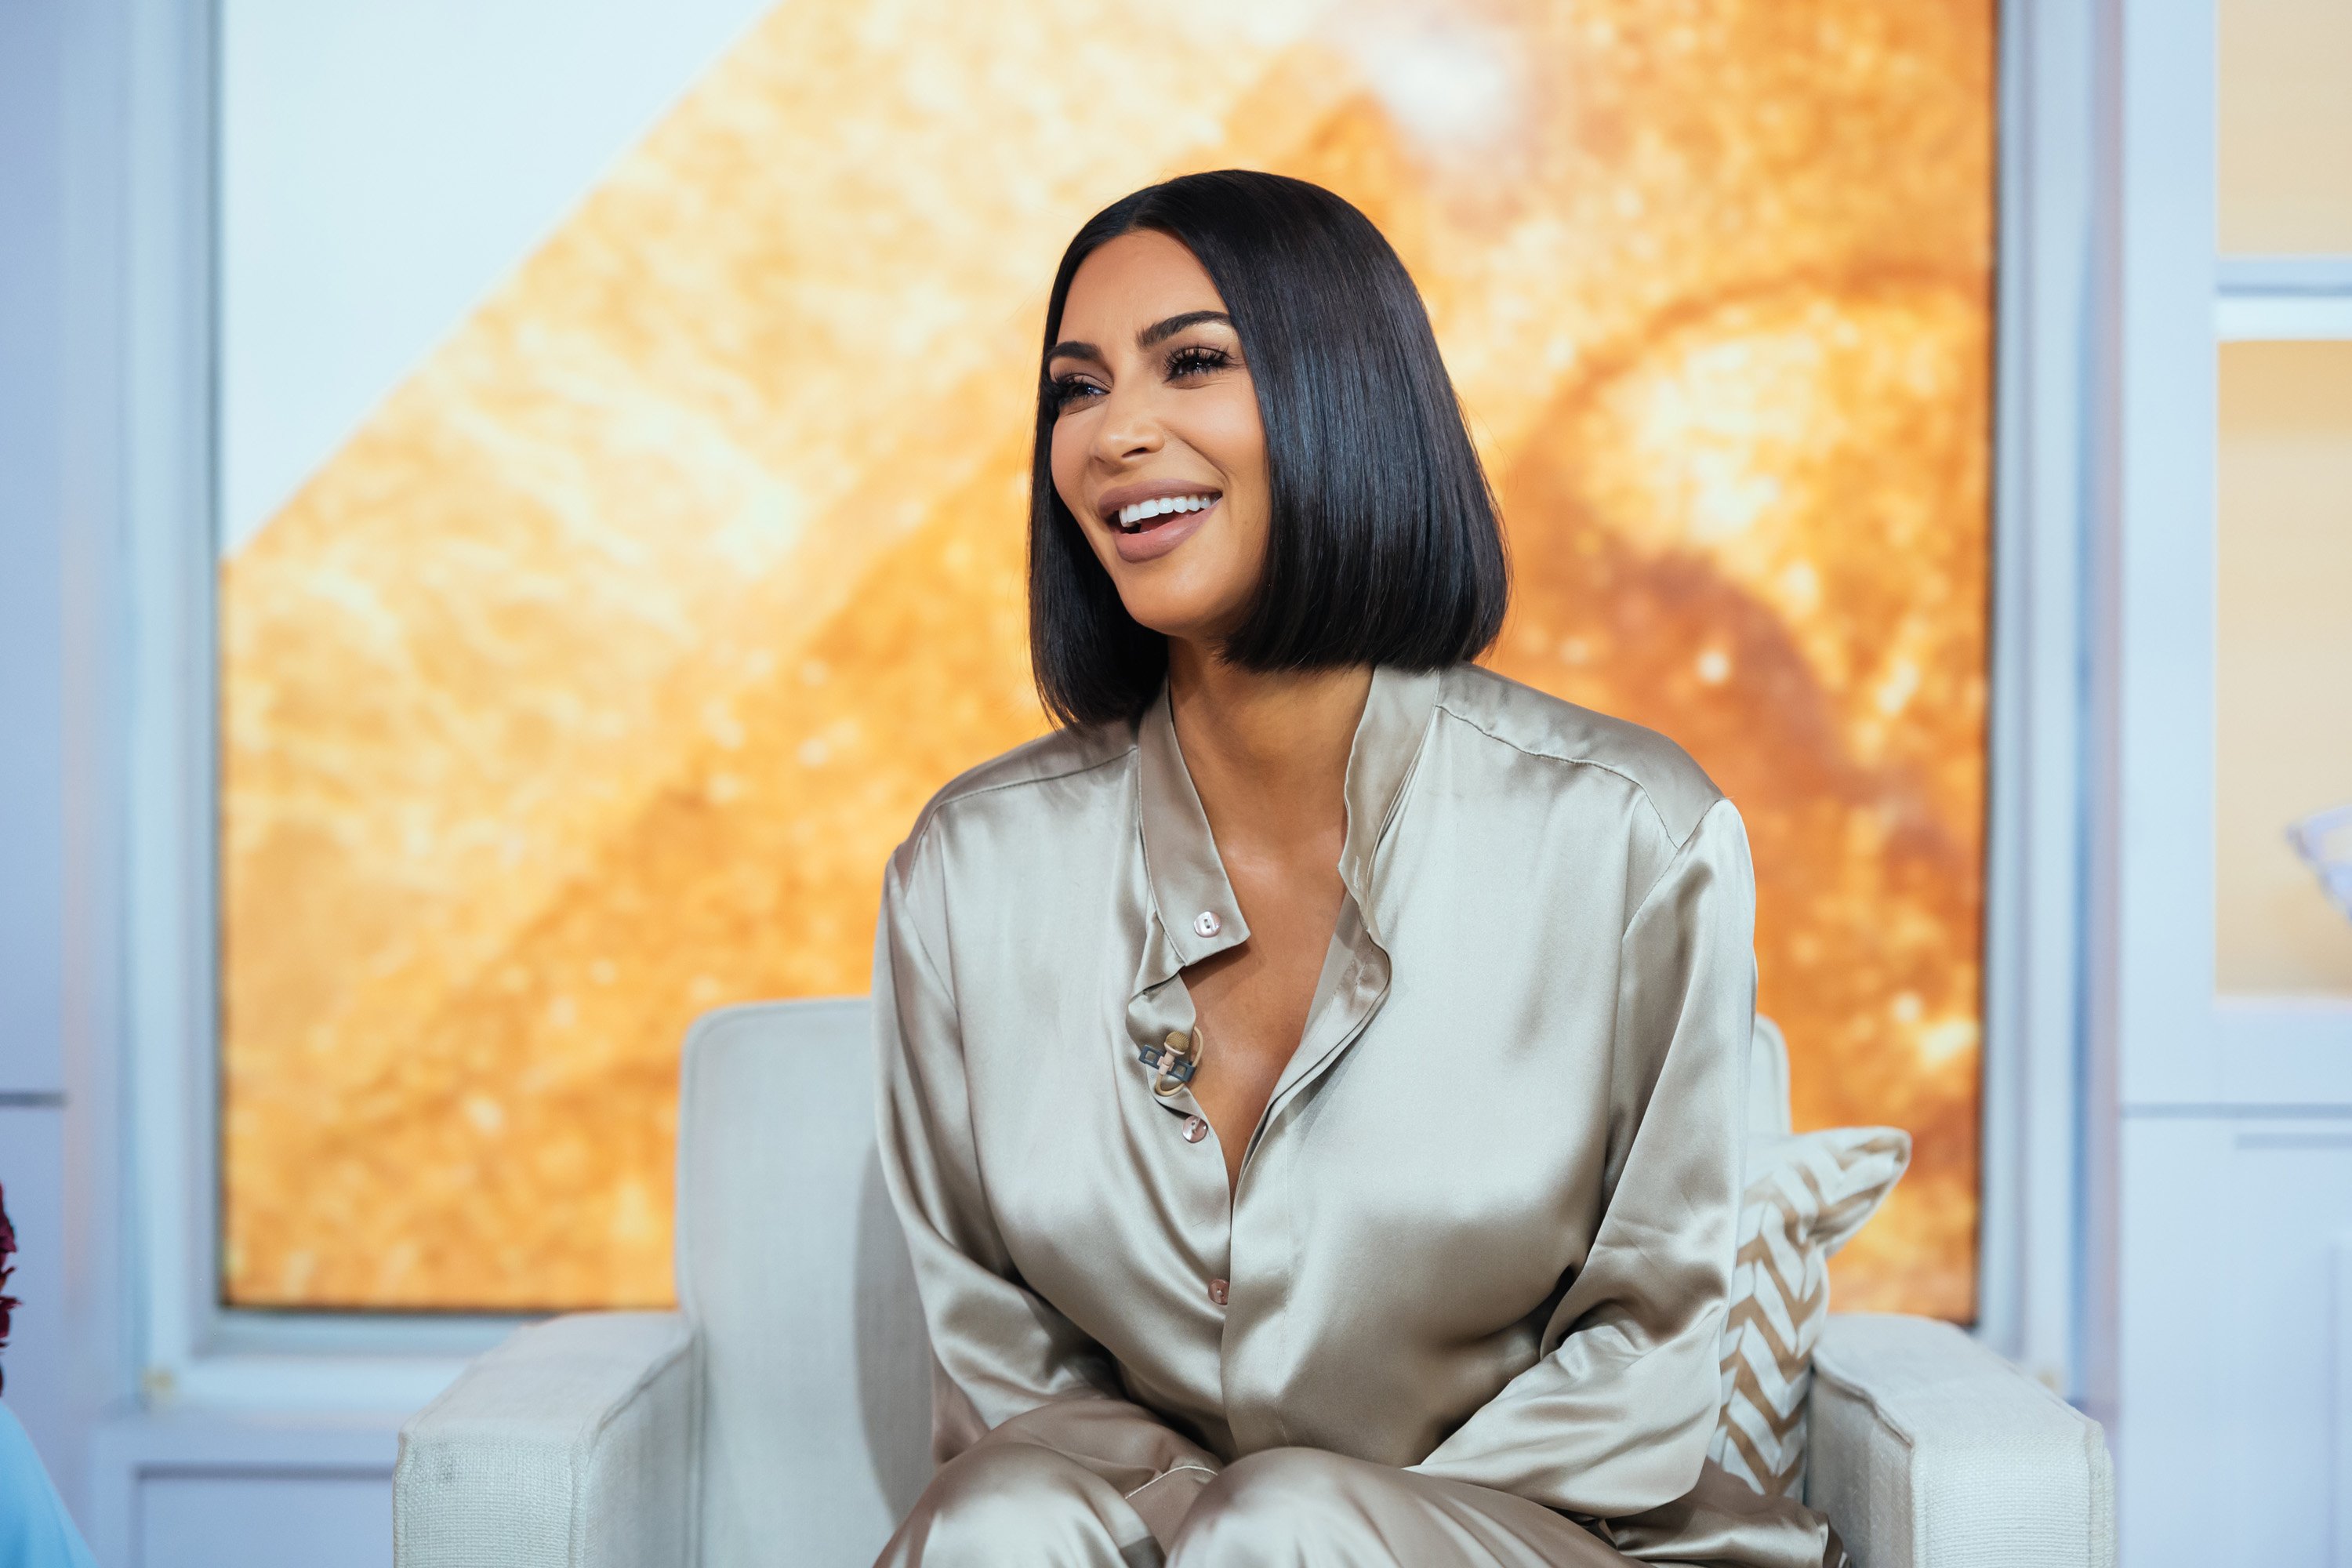 Kim Kardashian on the set of “Today” on Tuesday, September 10, 2019 | Photo: Getty Images